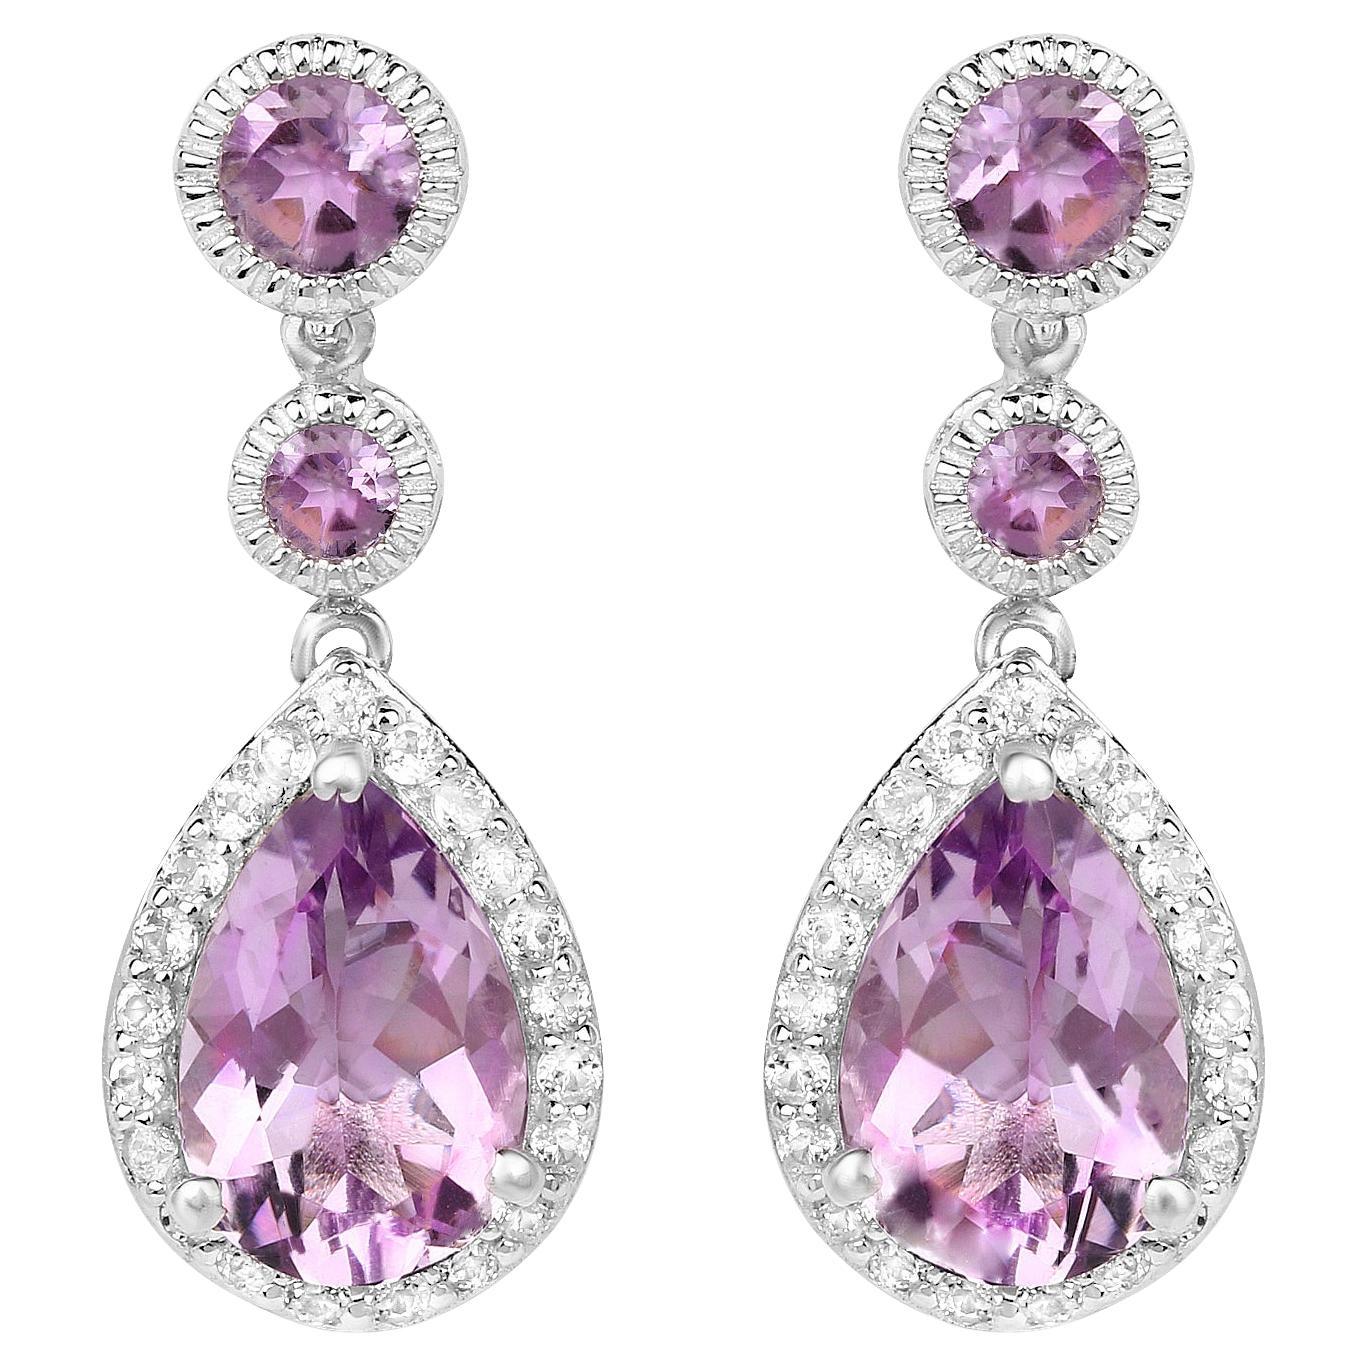 Amethyst Earrings With White Topazes 7.16 Carats Rhodium Plated Sterling Silver